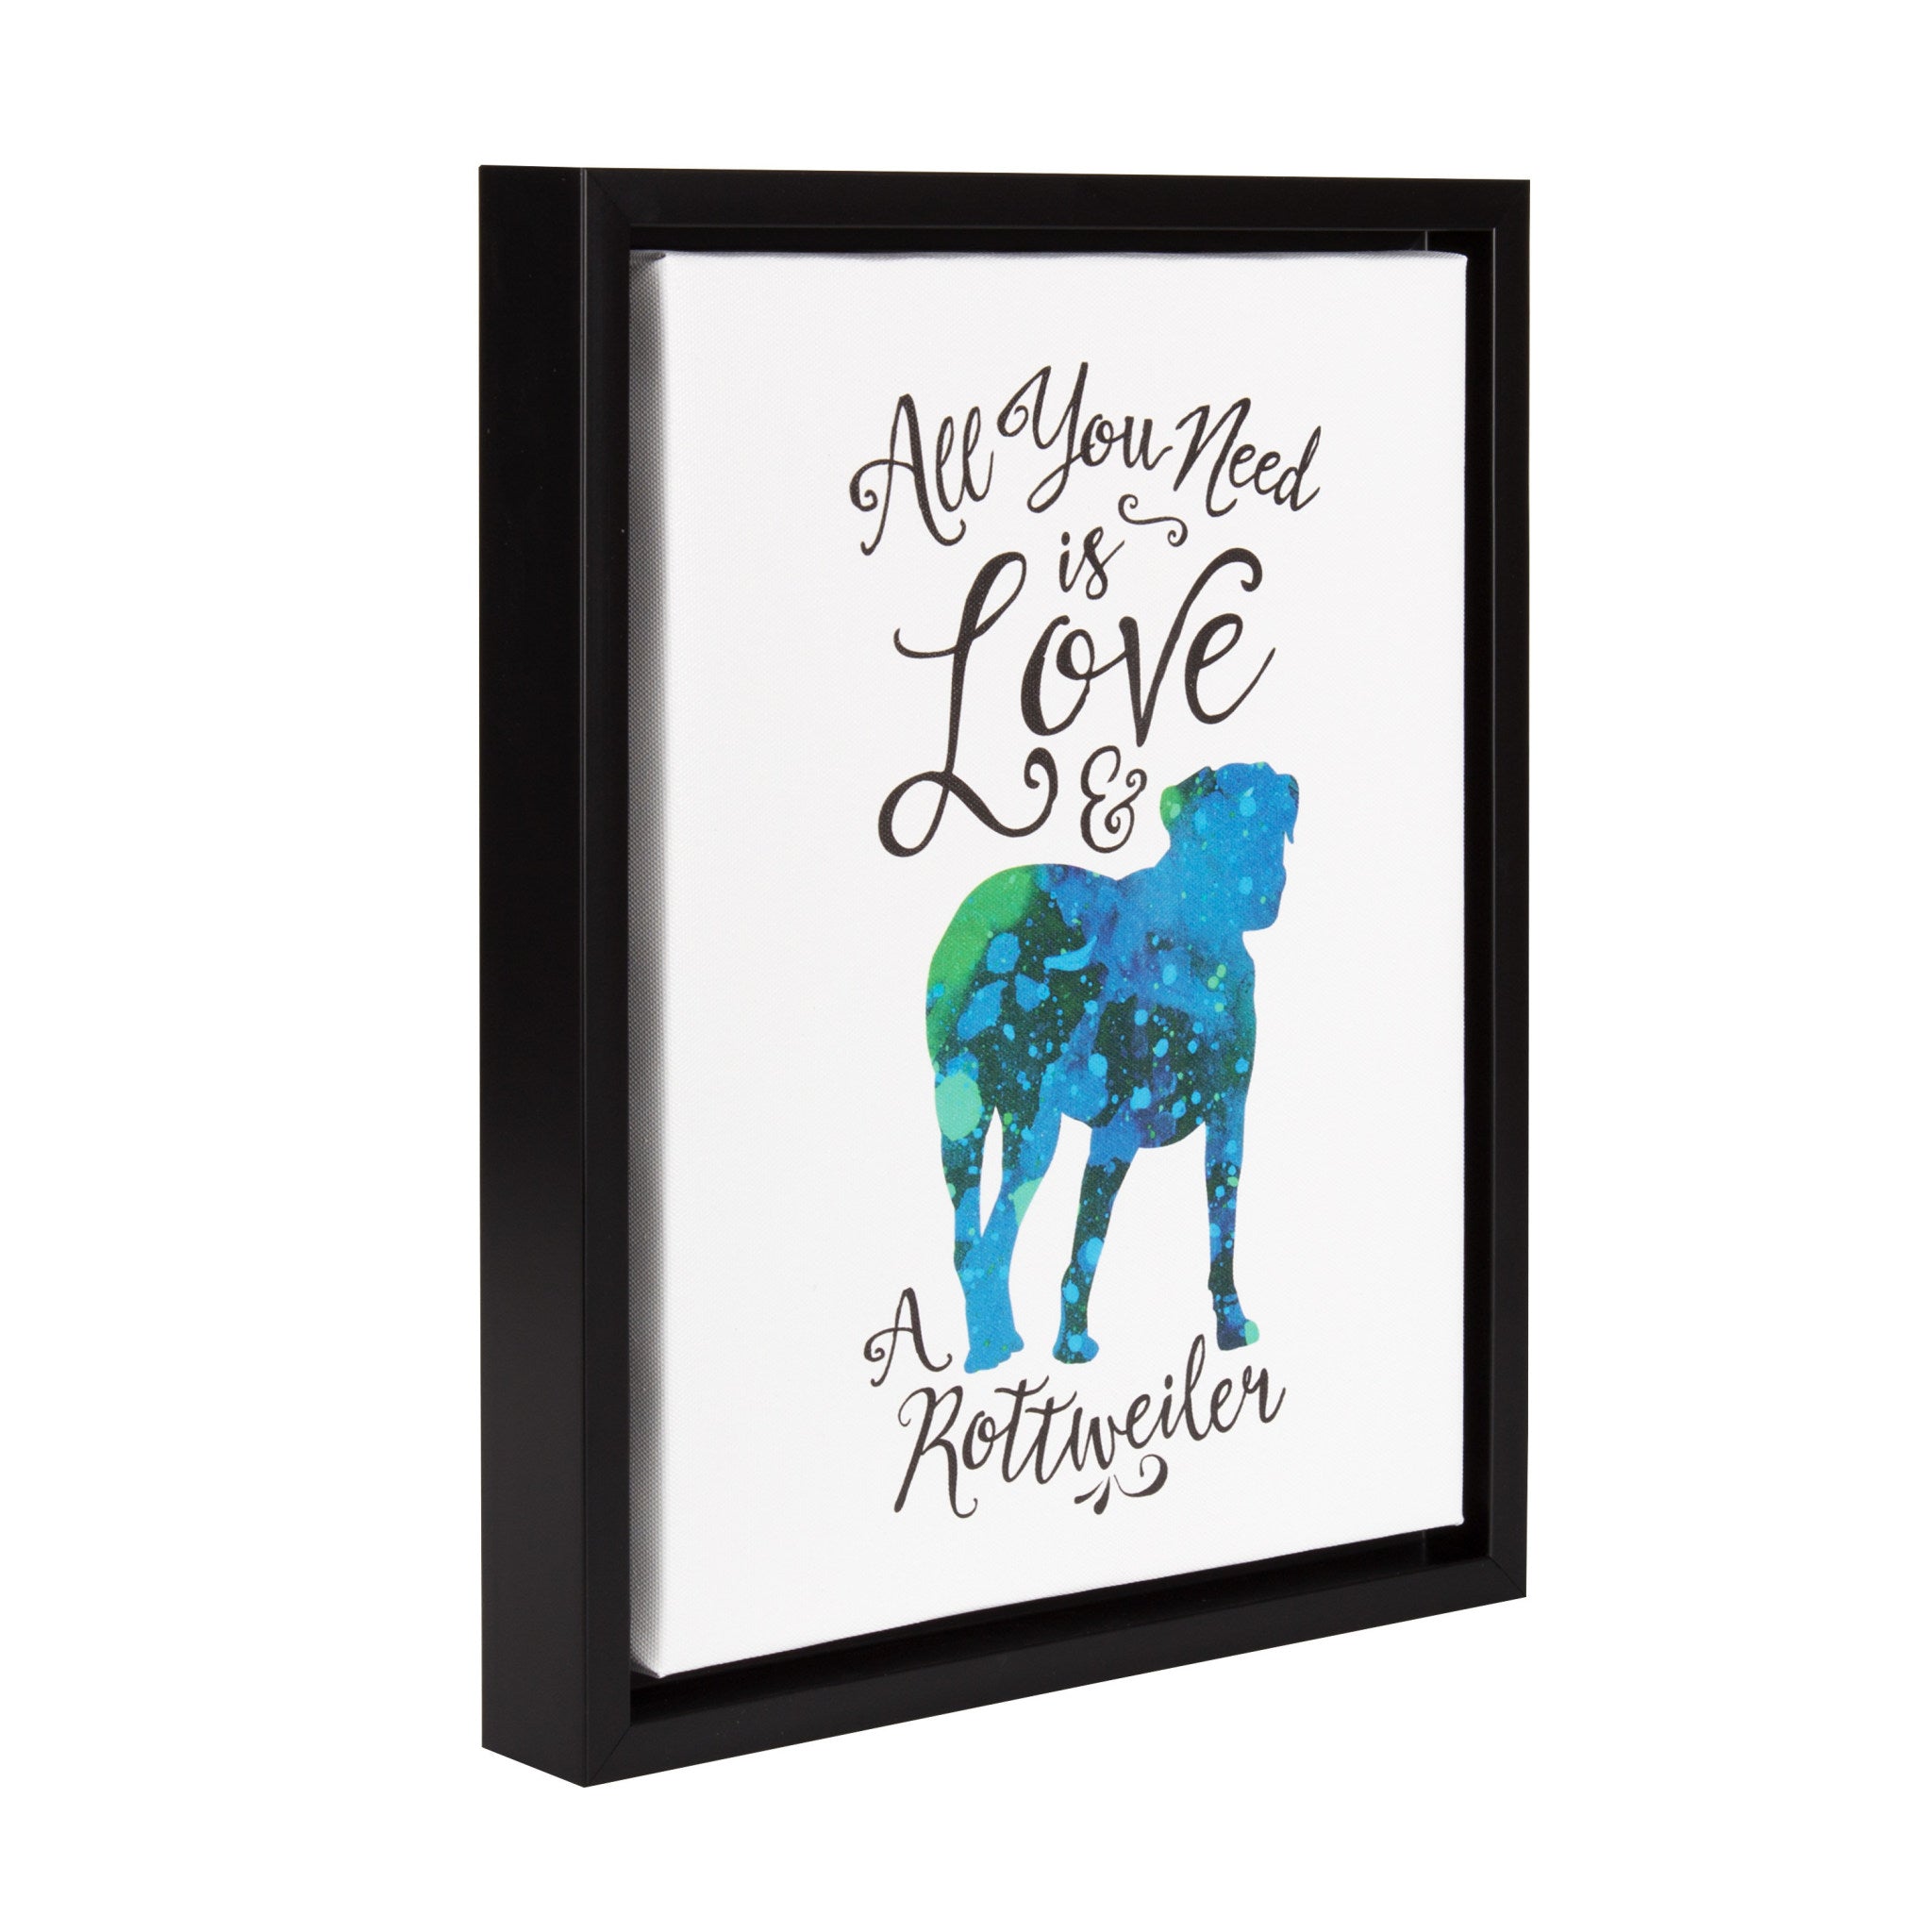 Sylvie Love and a Rottweiler Watercolor Framed Canvas, Black 11x14